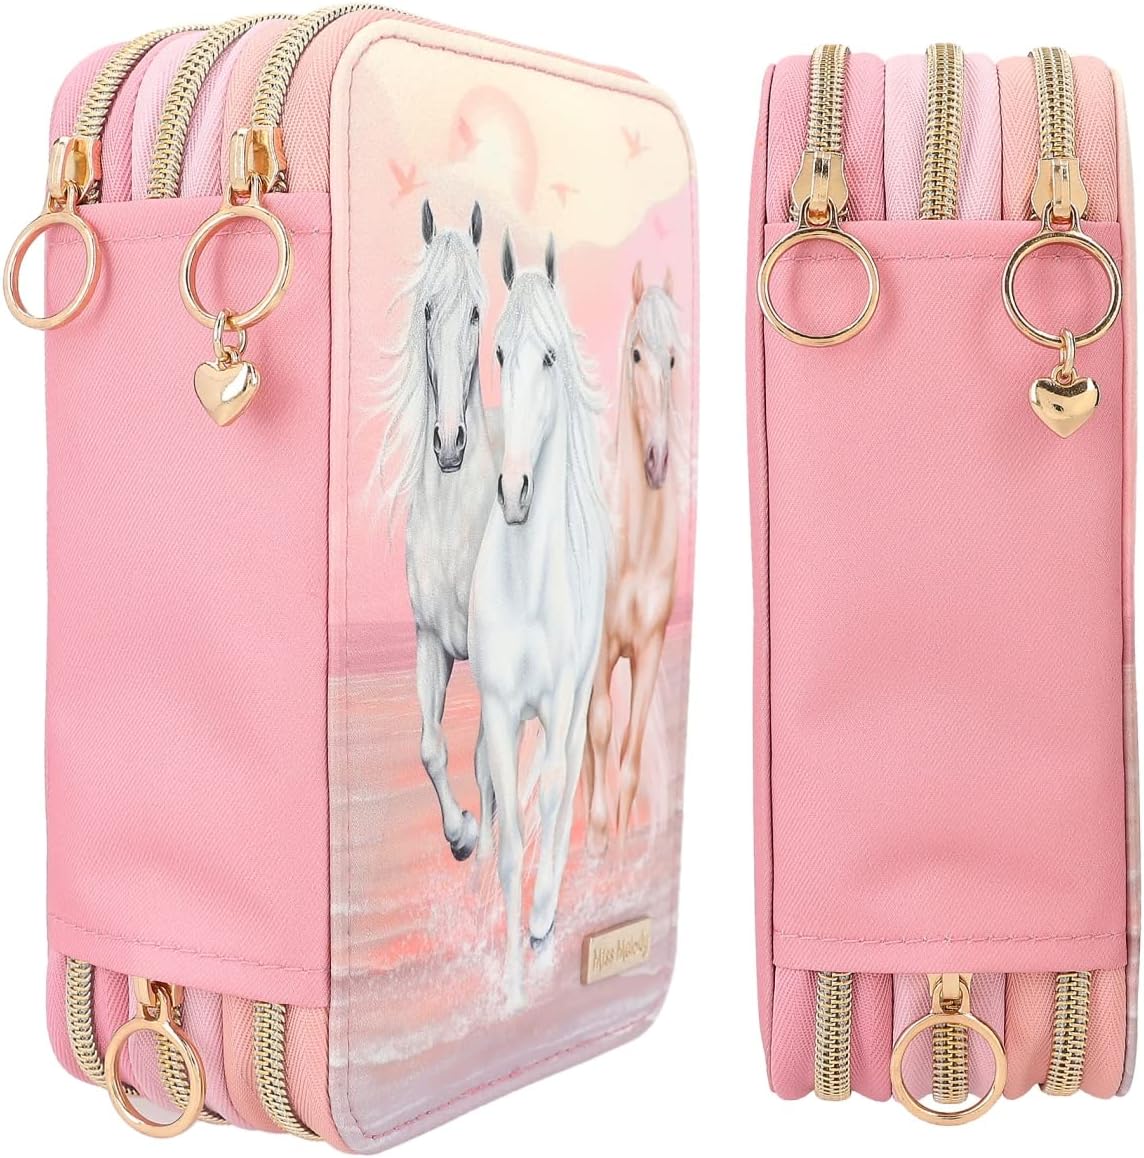 Miss Melody Triple Filled Pencil Case